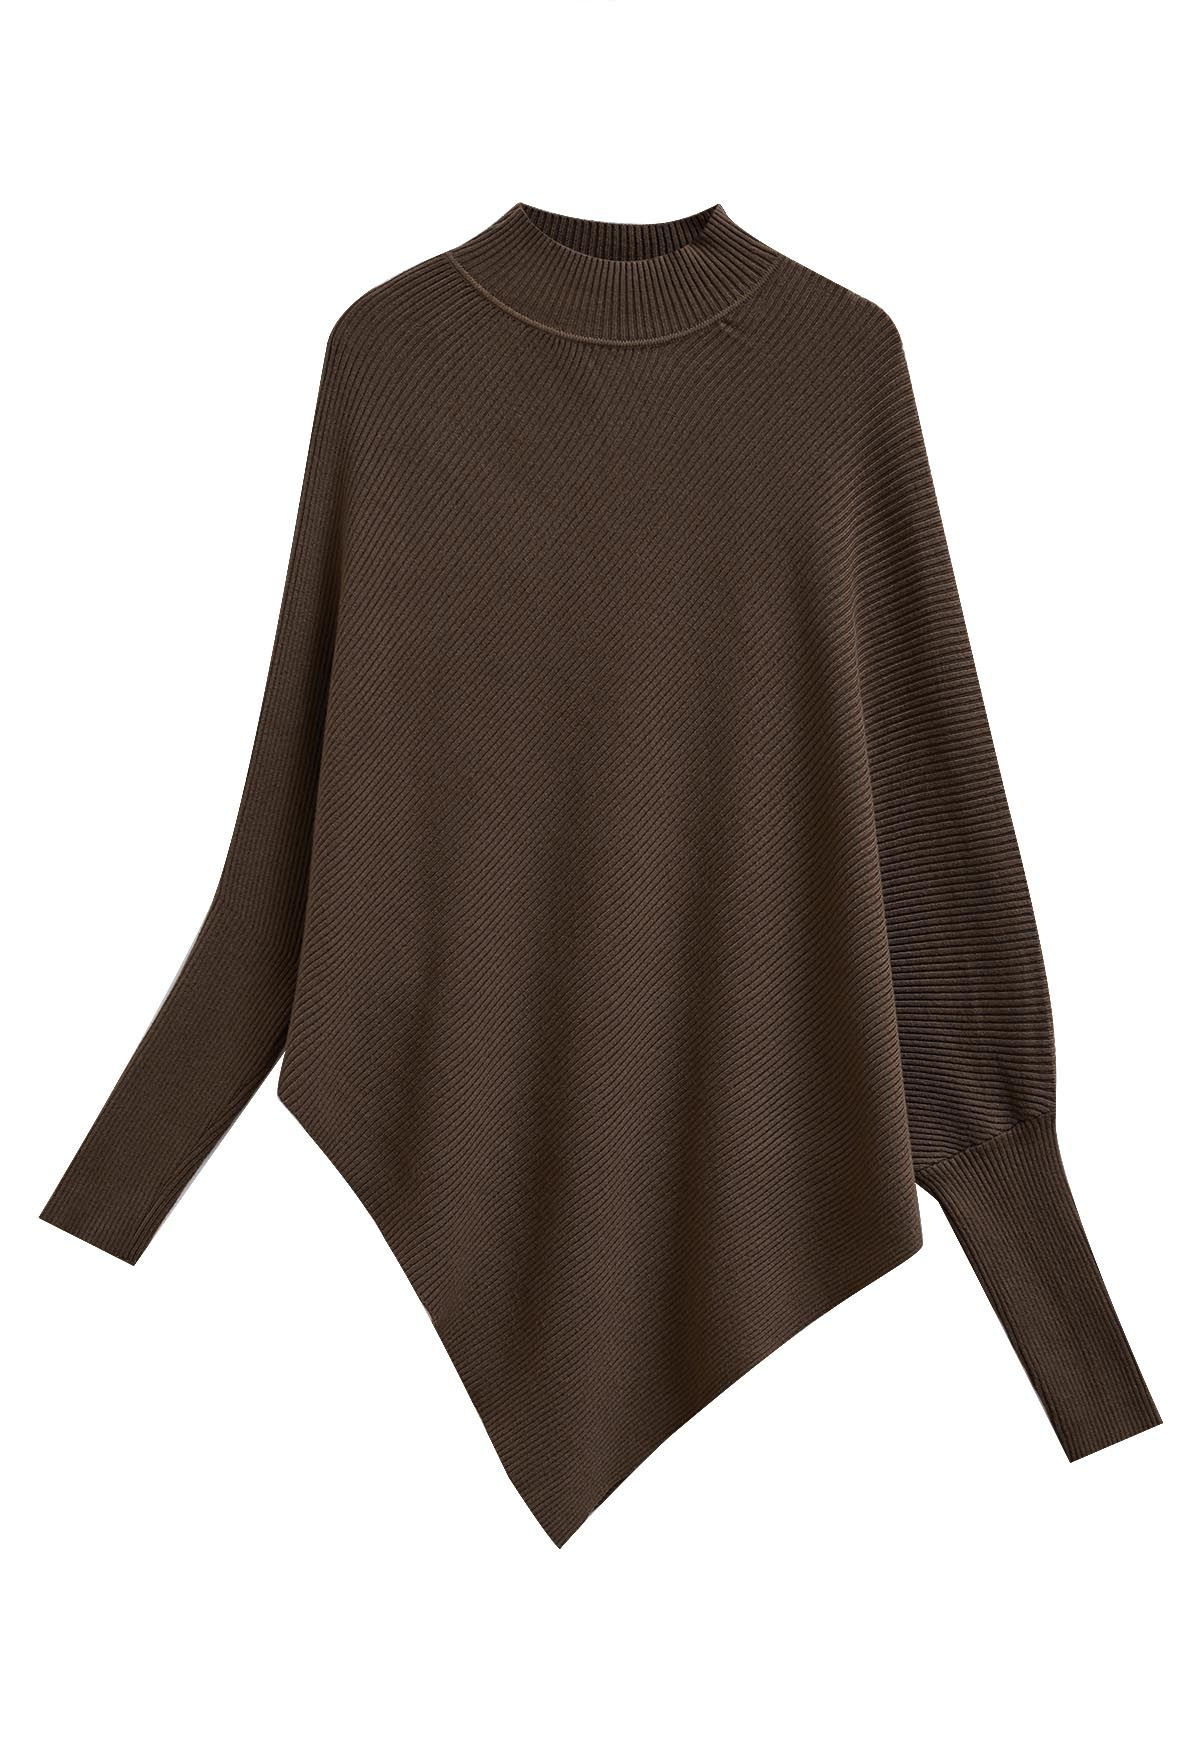 Asymmetric Batwing Sleeve Ribbed Knit Poncho in Brown